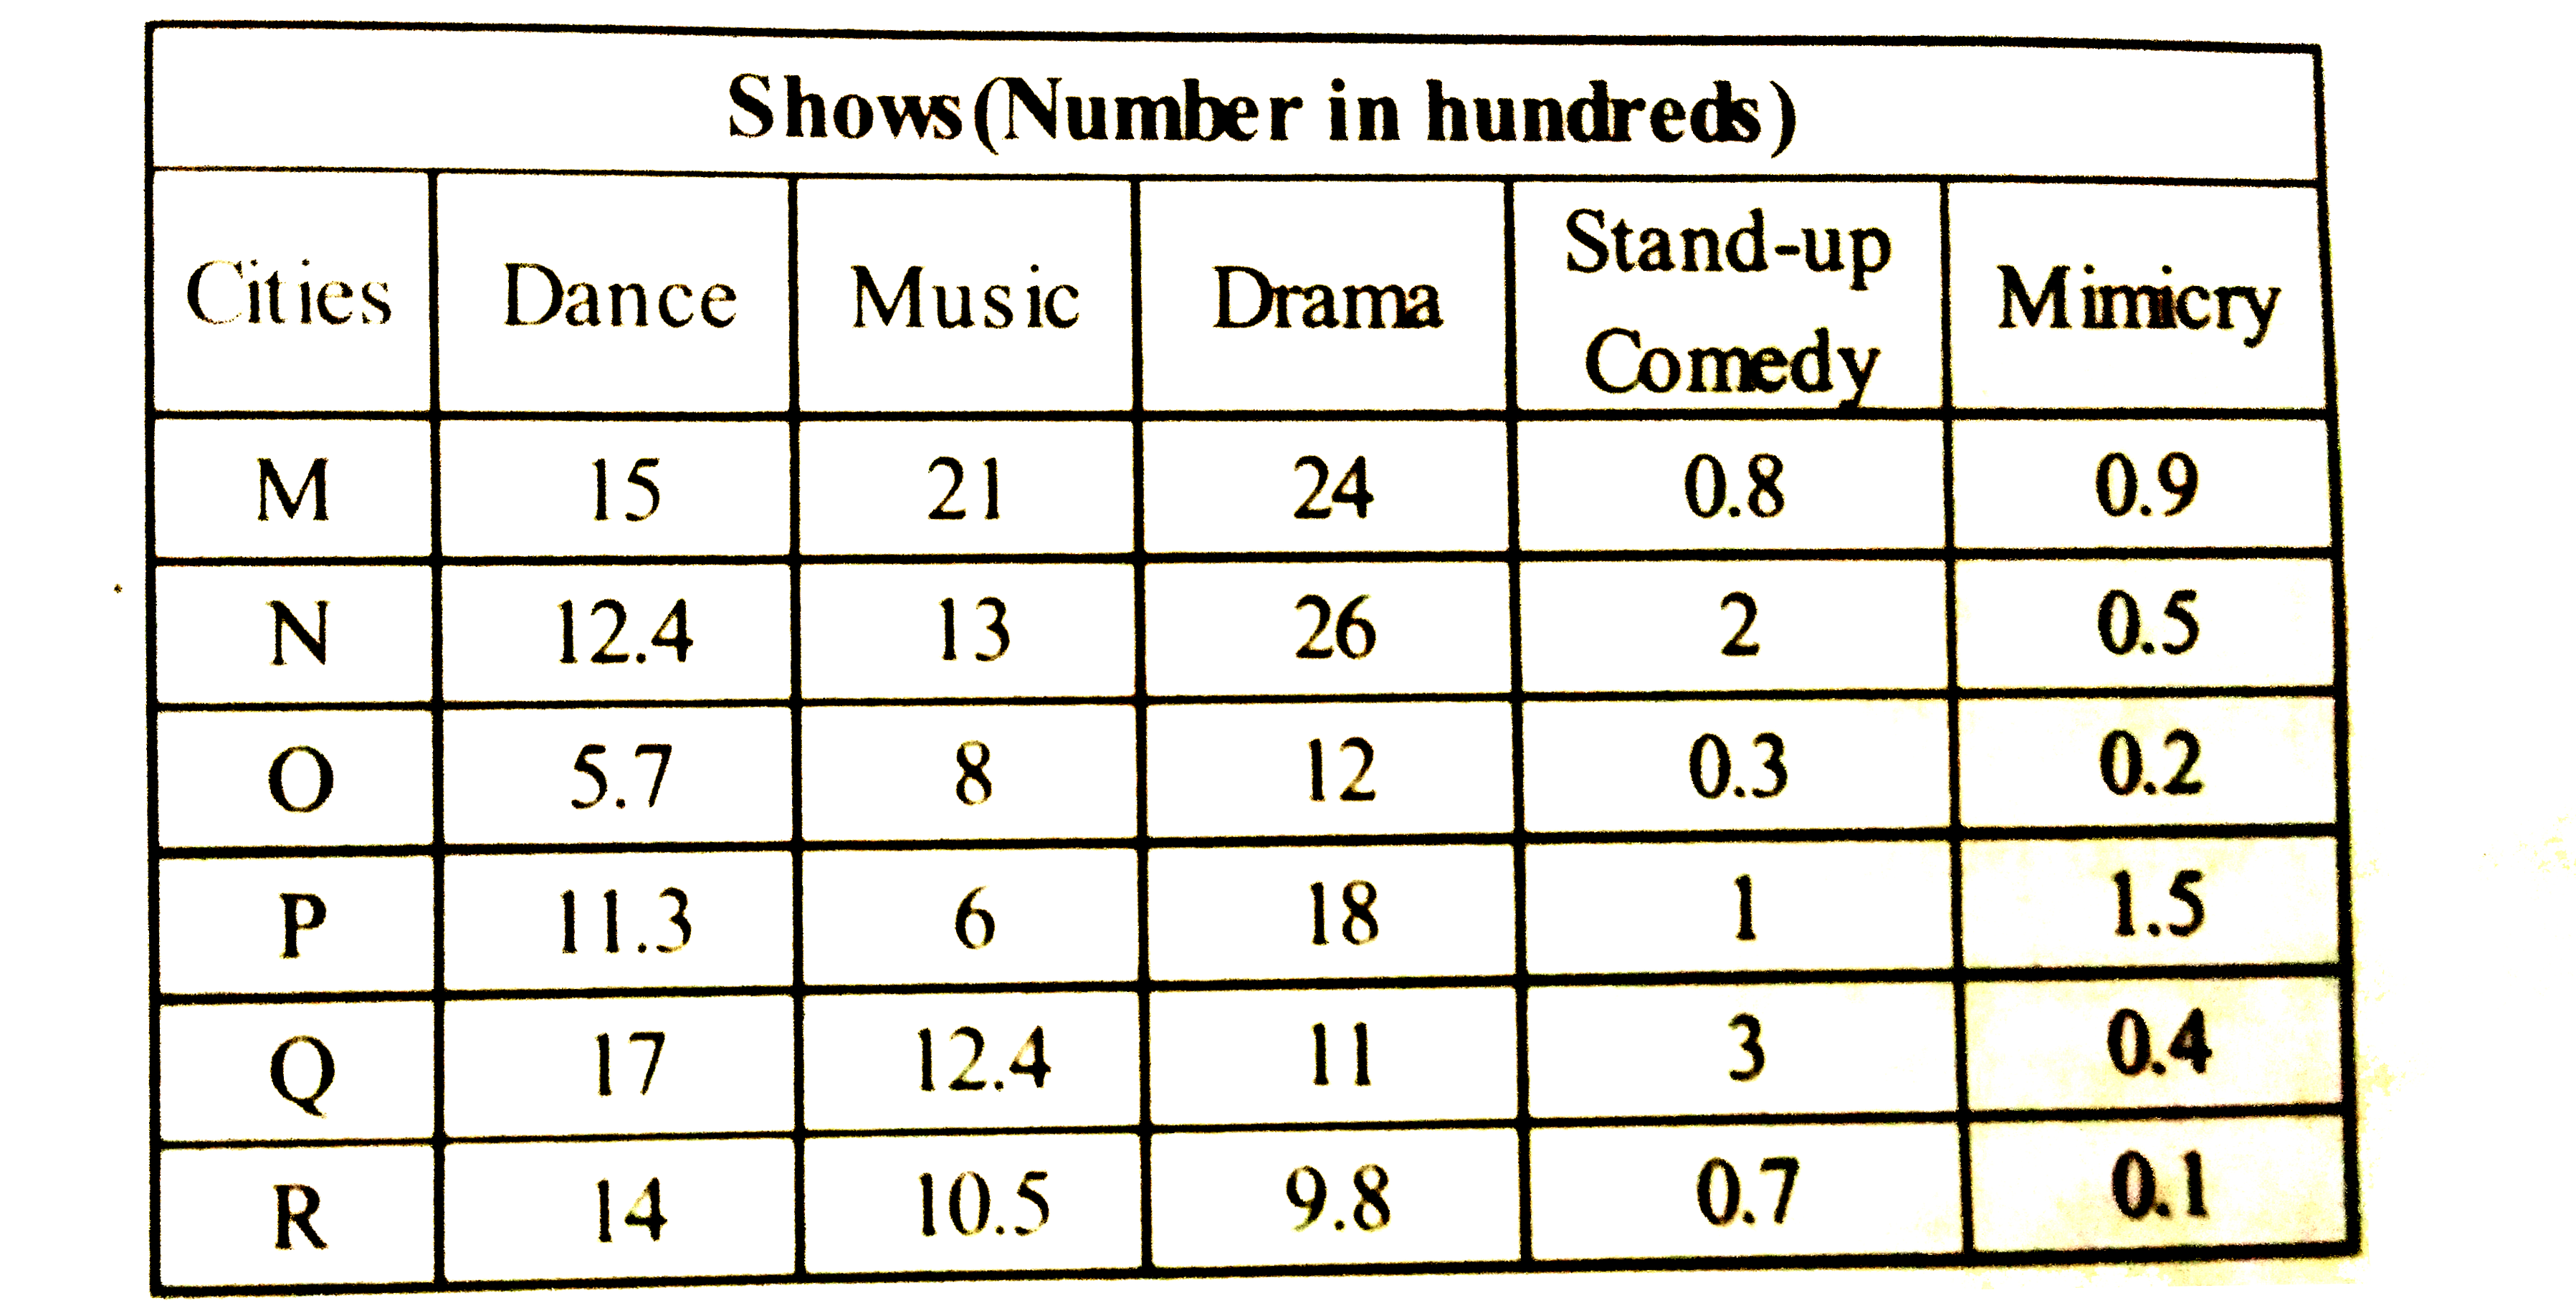 The mimicy held in city M are what percent of the drama shows held in city Q ?